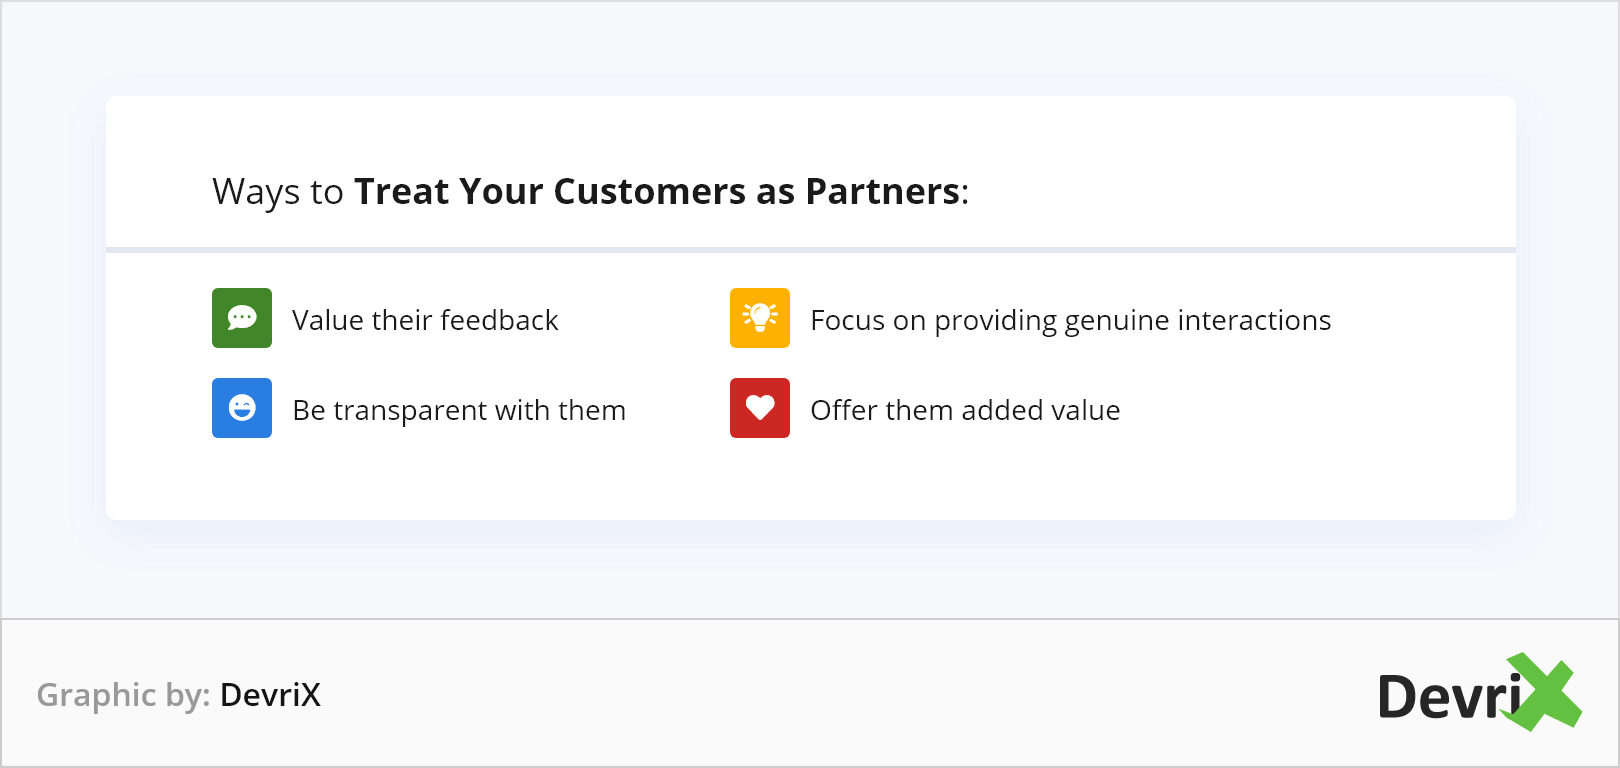 Ways to Treat Your Customers as Partners